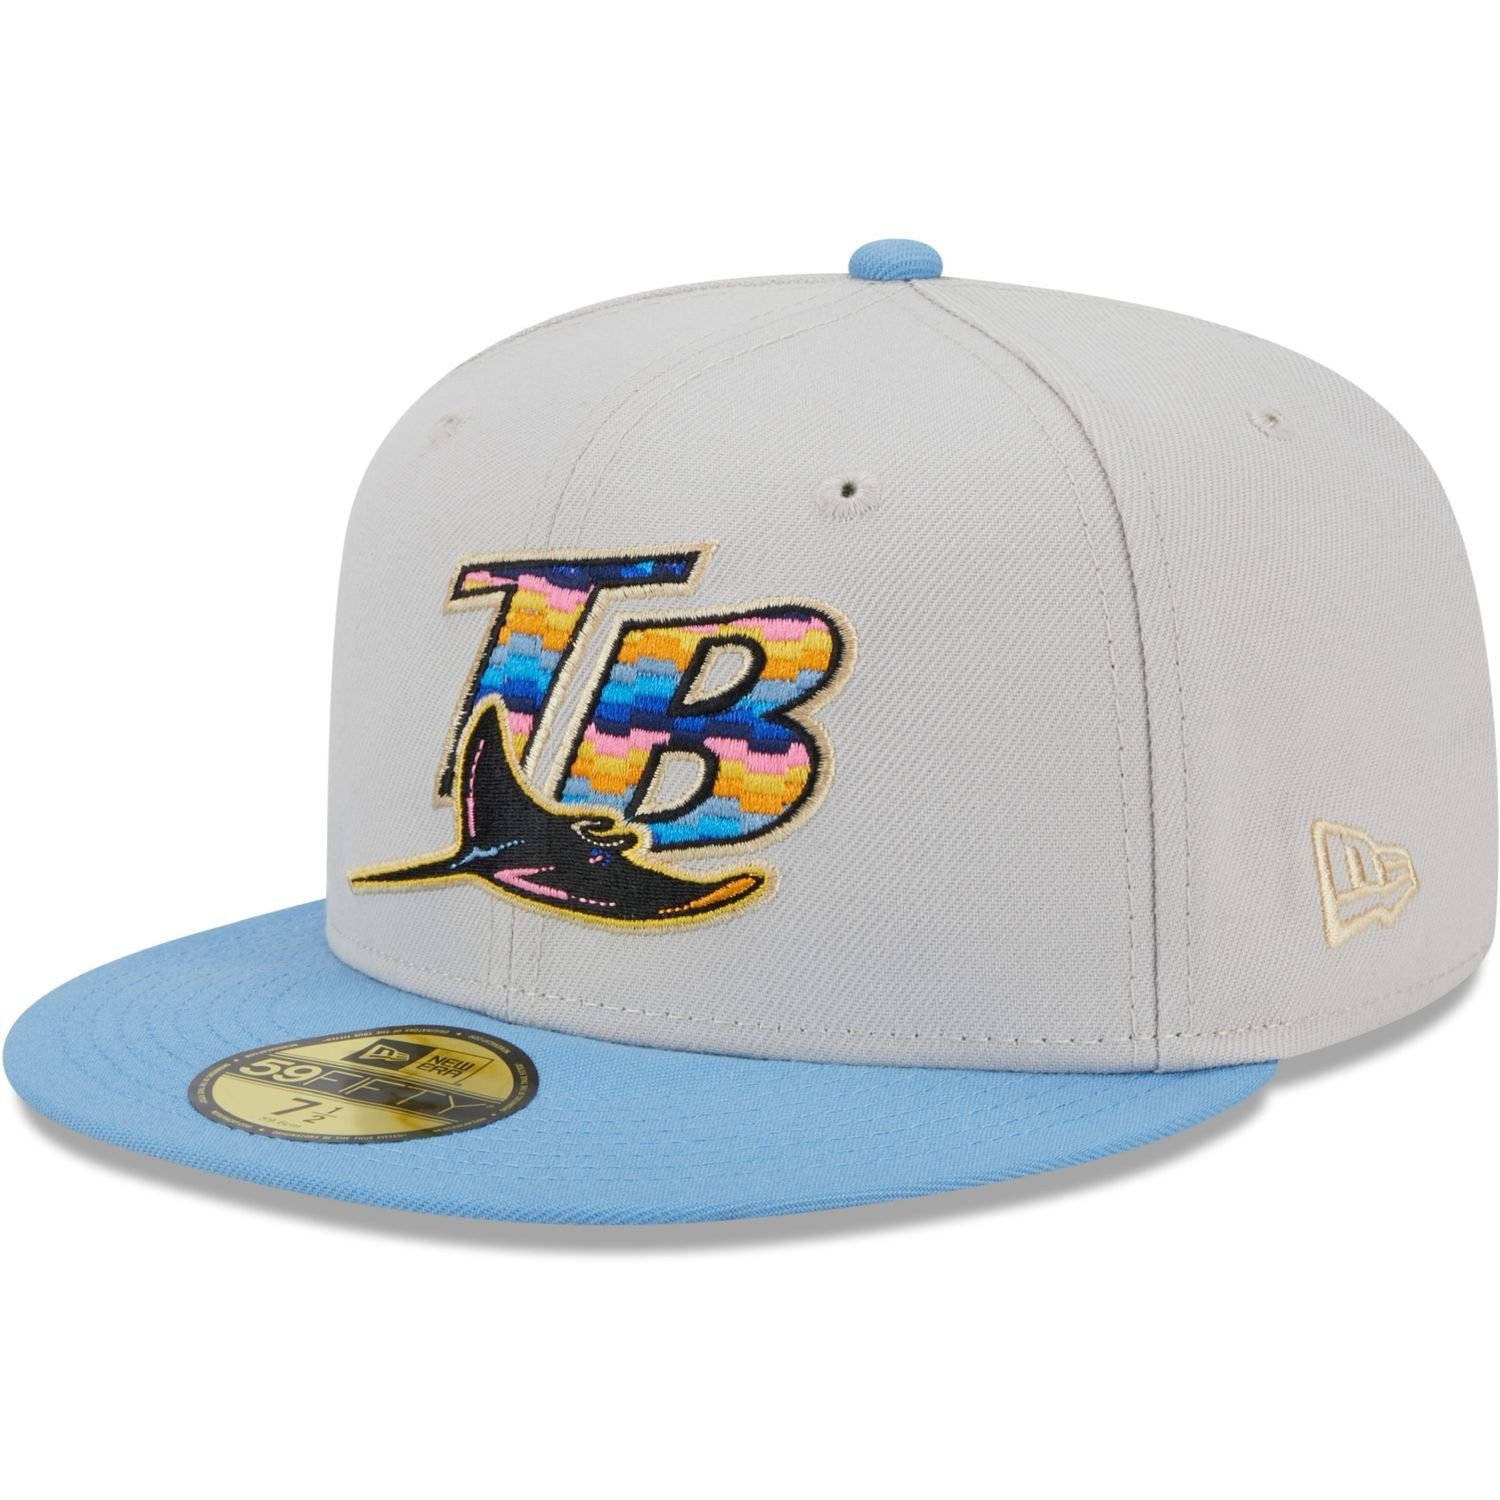 BEACHFRONT Bay Cap New Fitted Tampa Era 59Fifty Rays